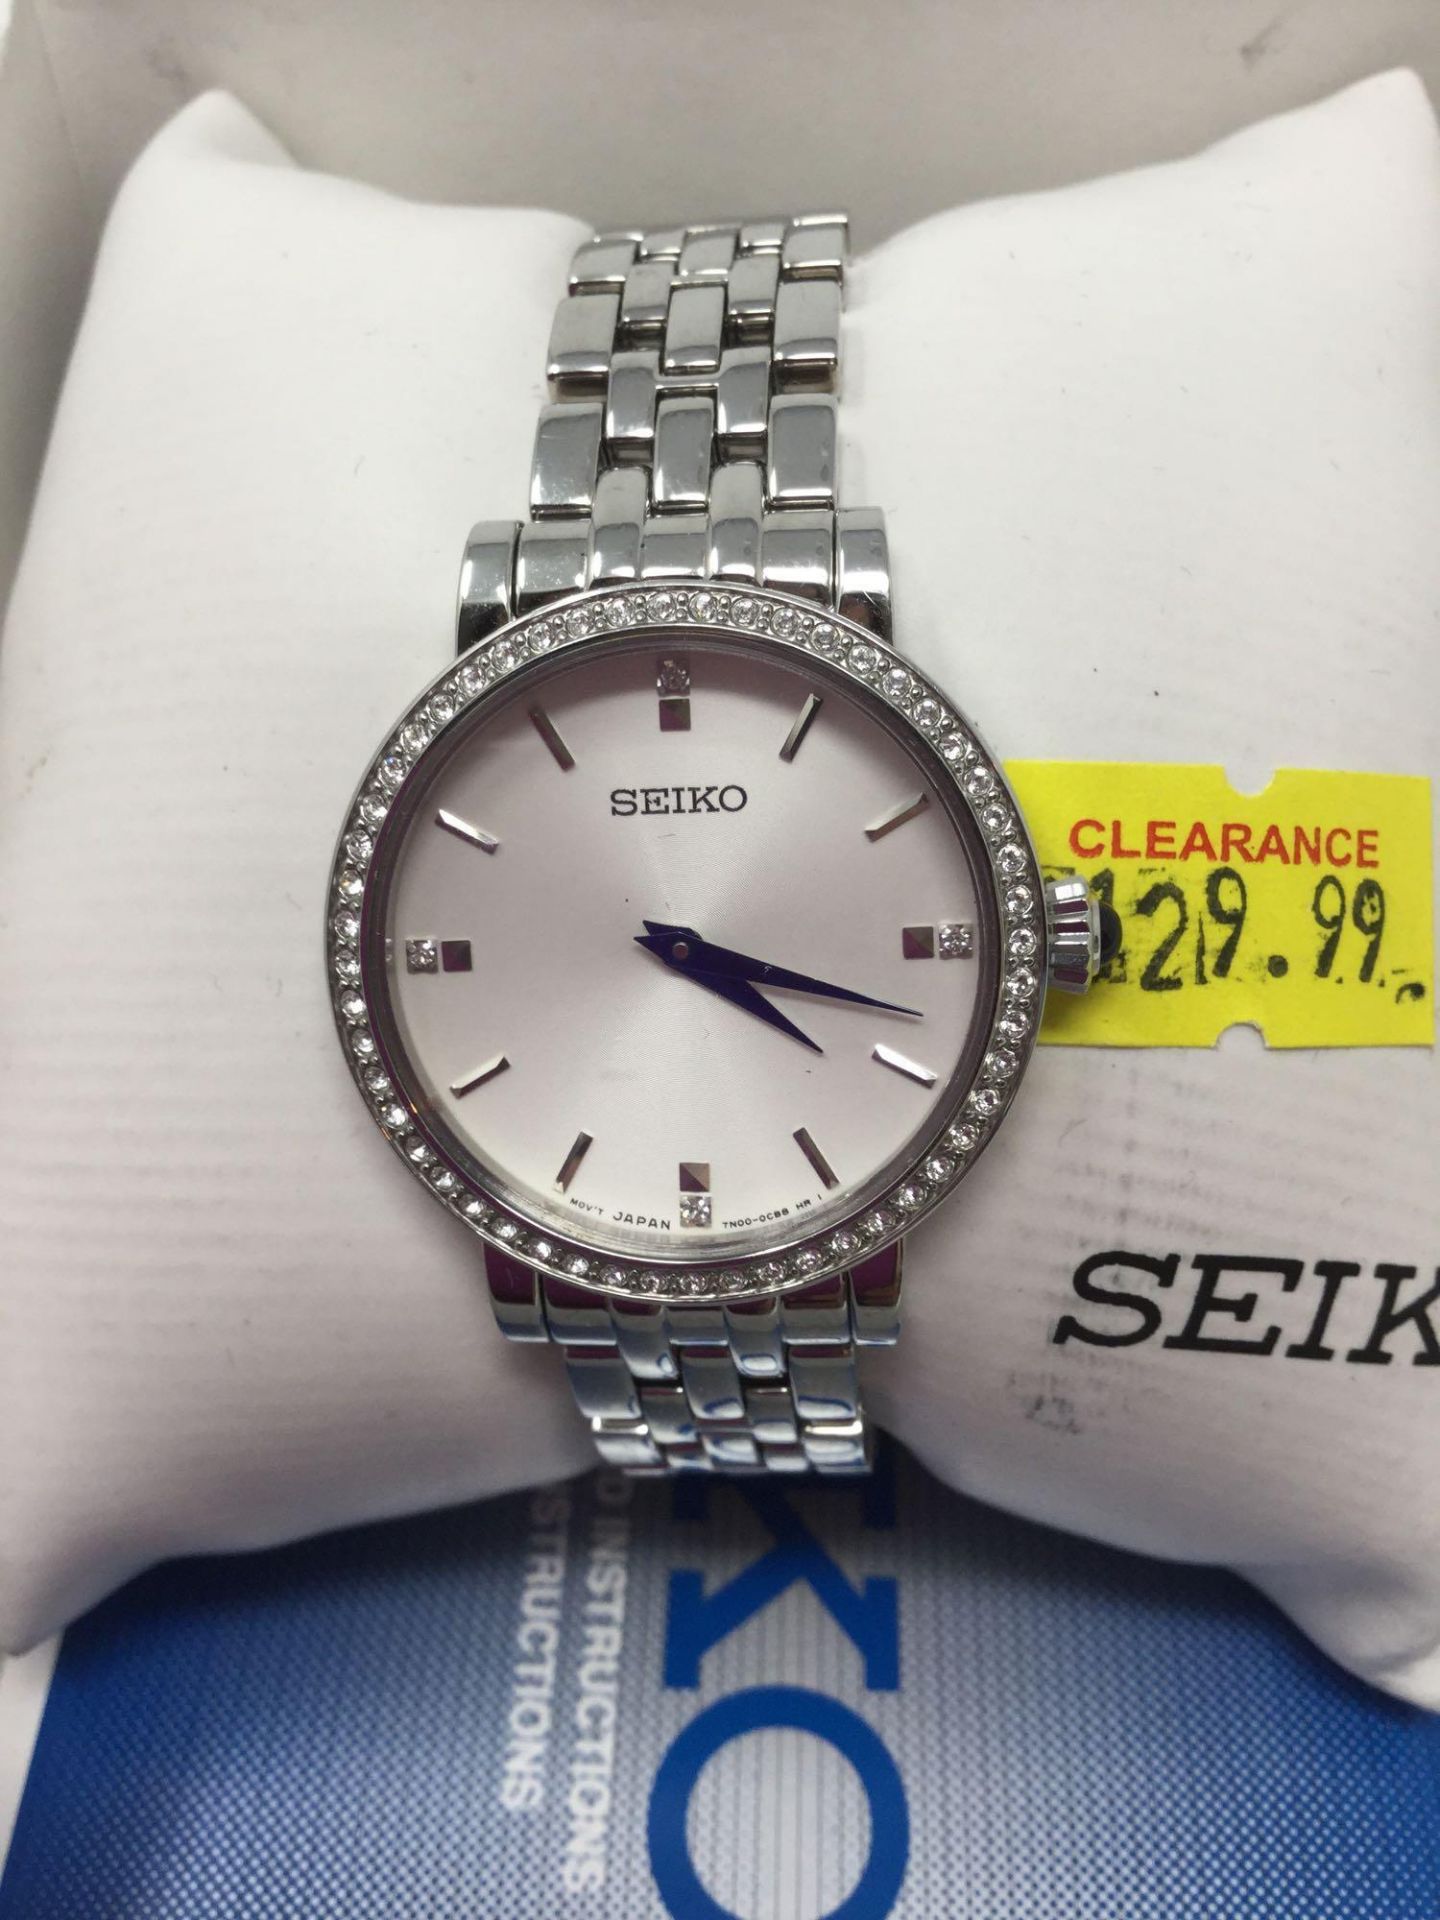 Seiko Watch - Silver Band, Crystals around face, Blue Hands and White Face - Image 2 of 2